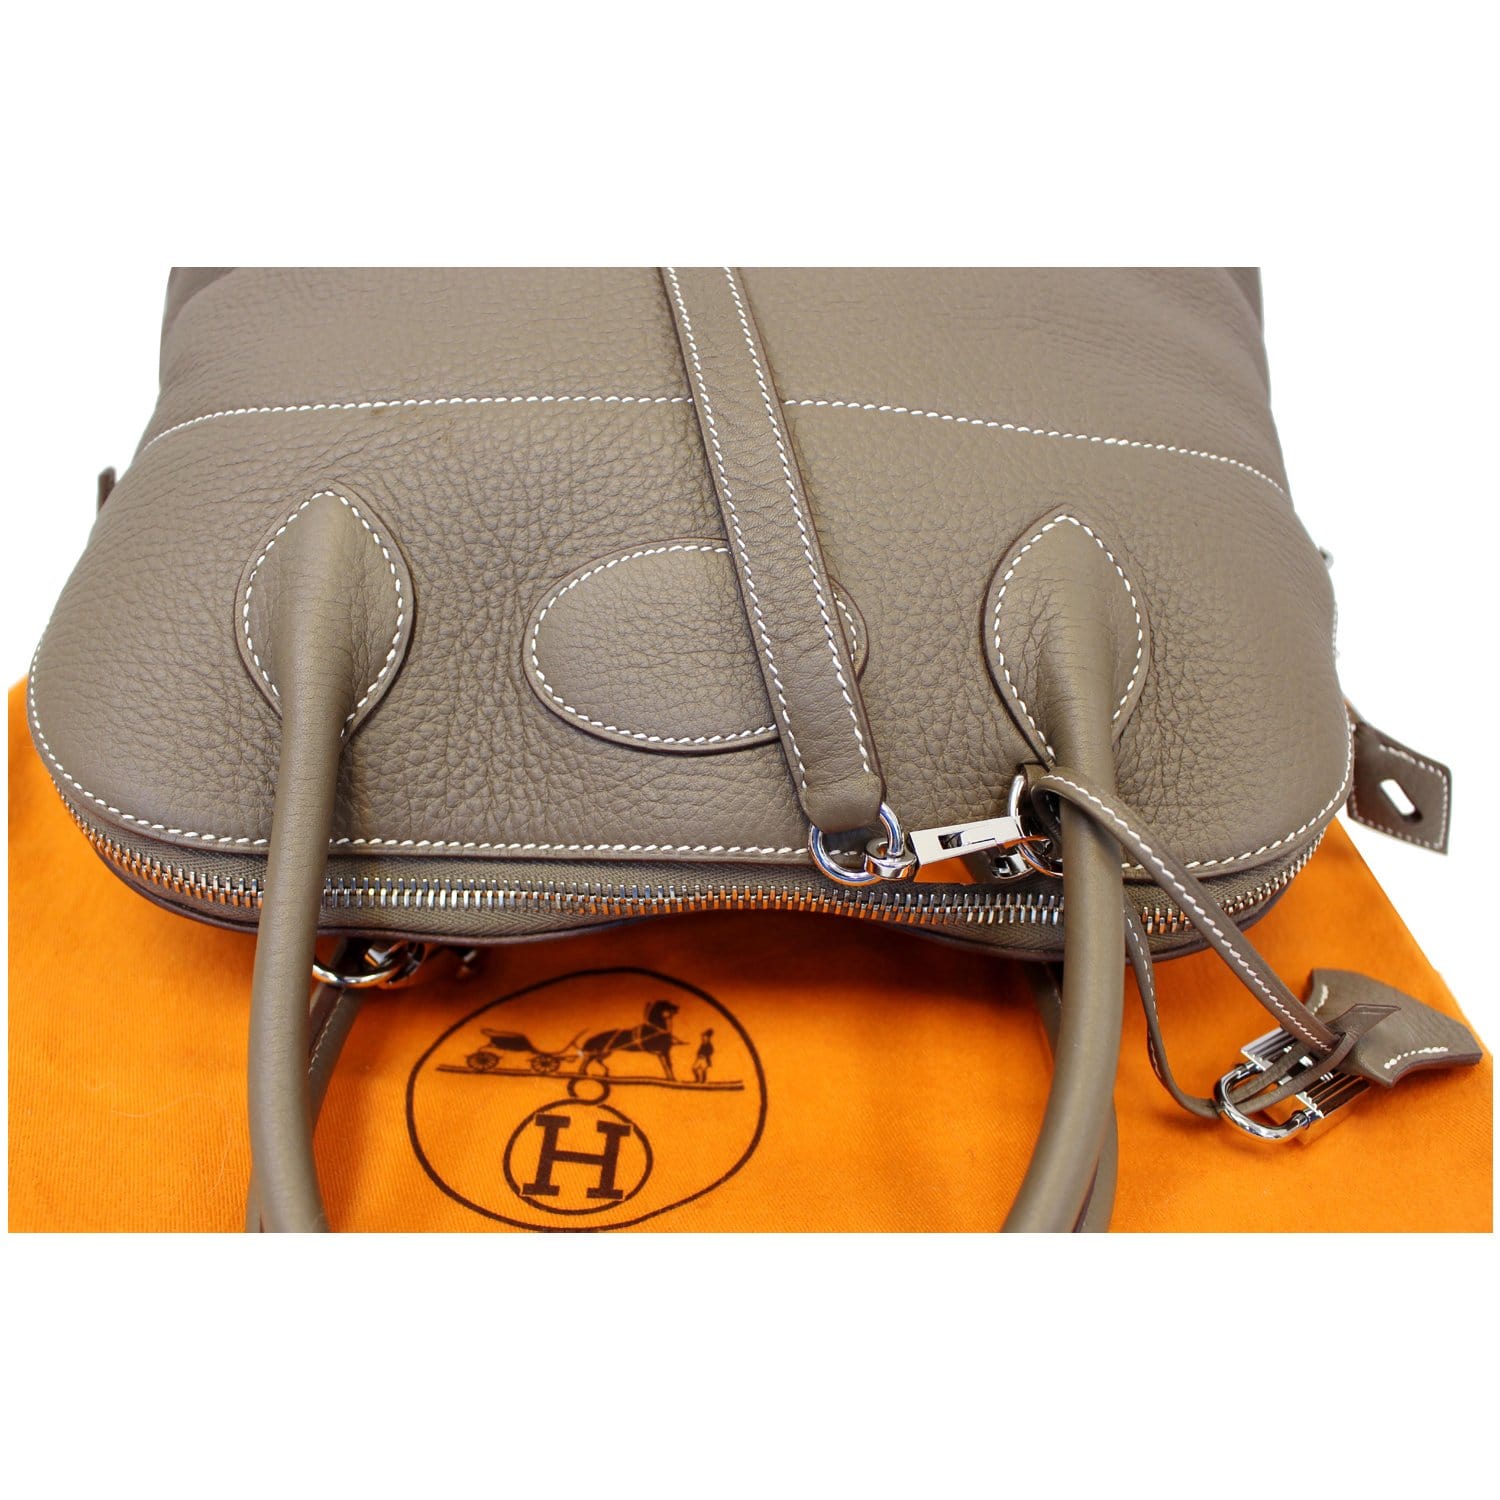 Hermes Phw Bolide 31 2way Shoulder Bag Taurillon Clemence Leather